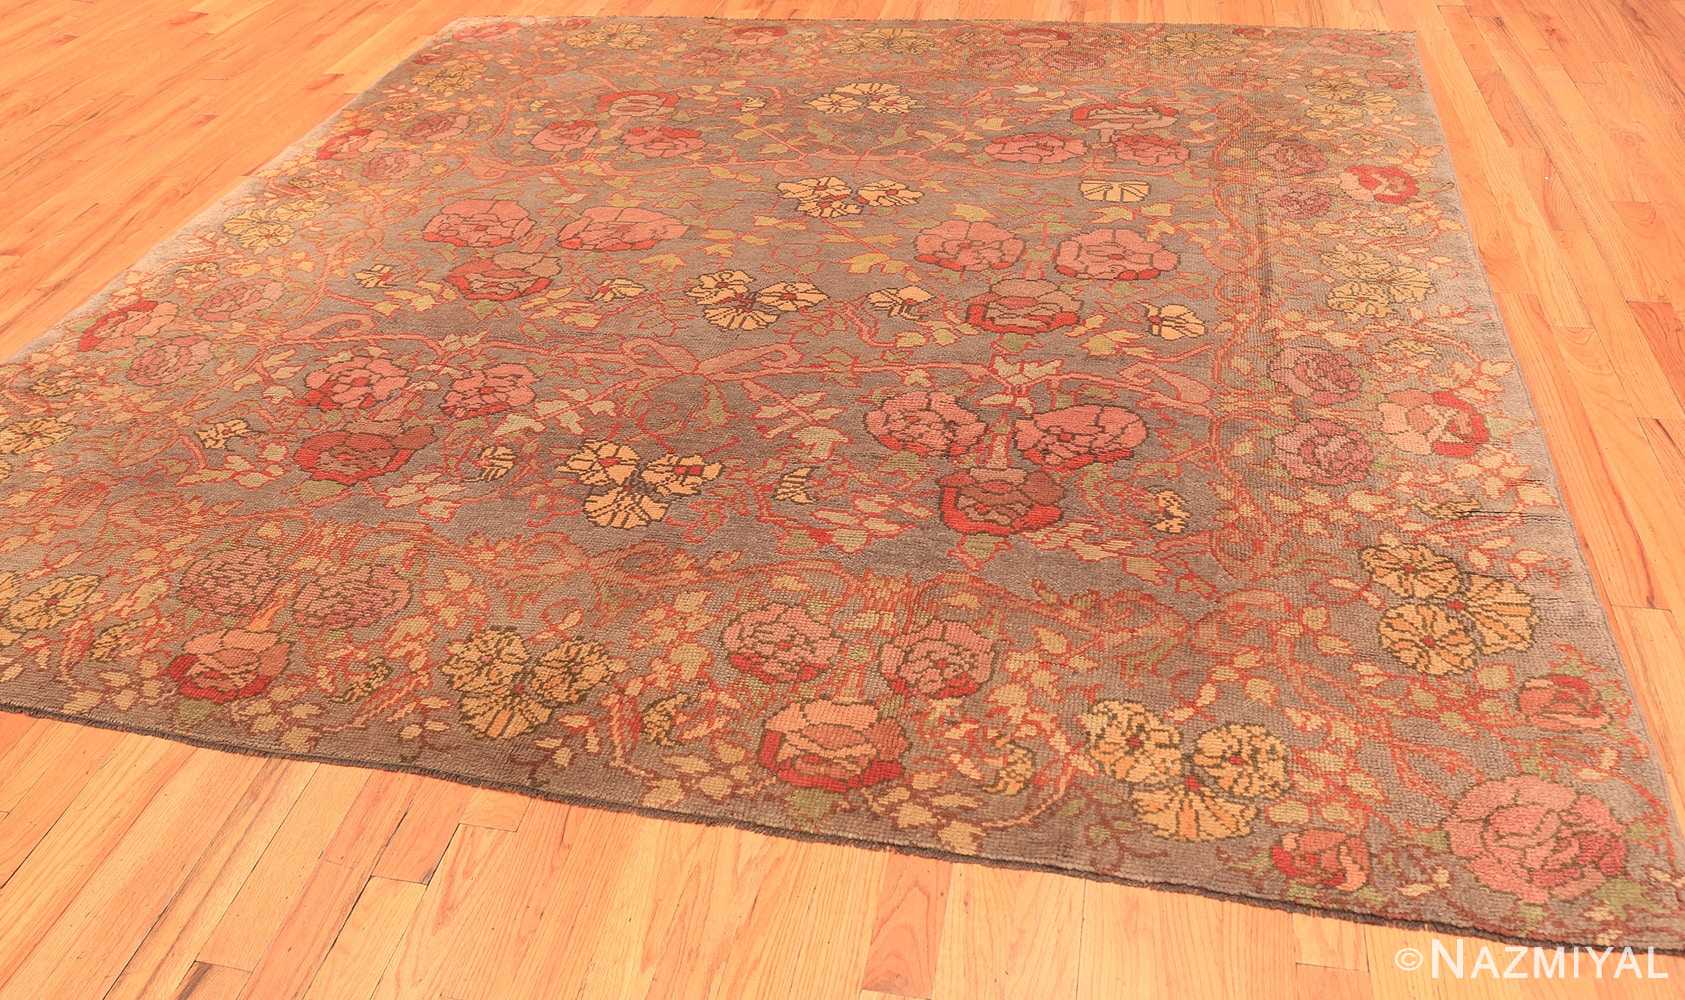 Full floral square size Donegal Irish rug 70224 by Nazmiyal